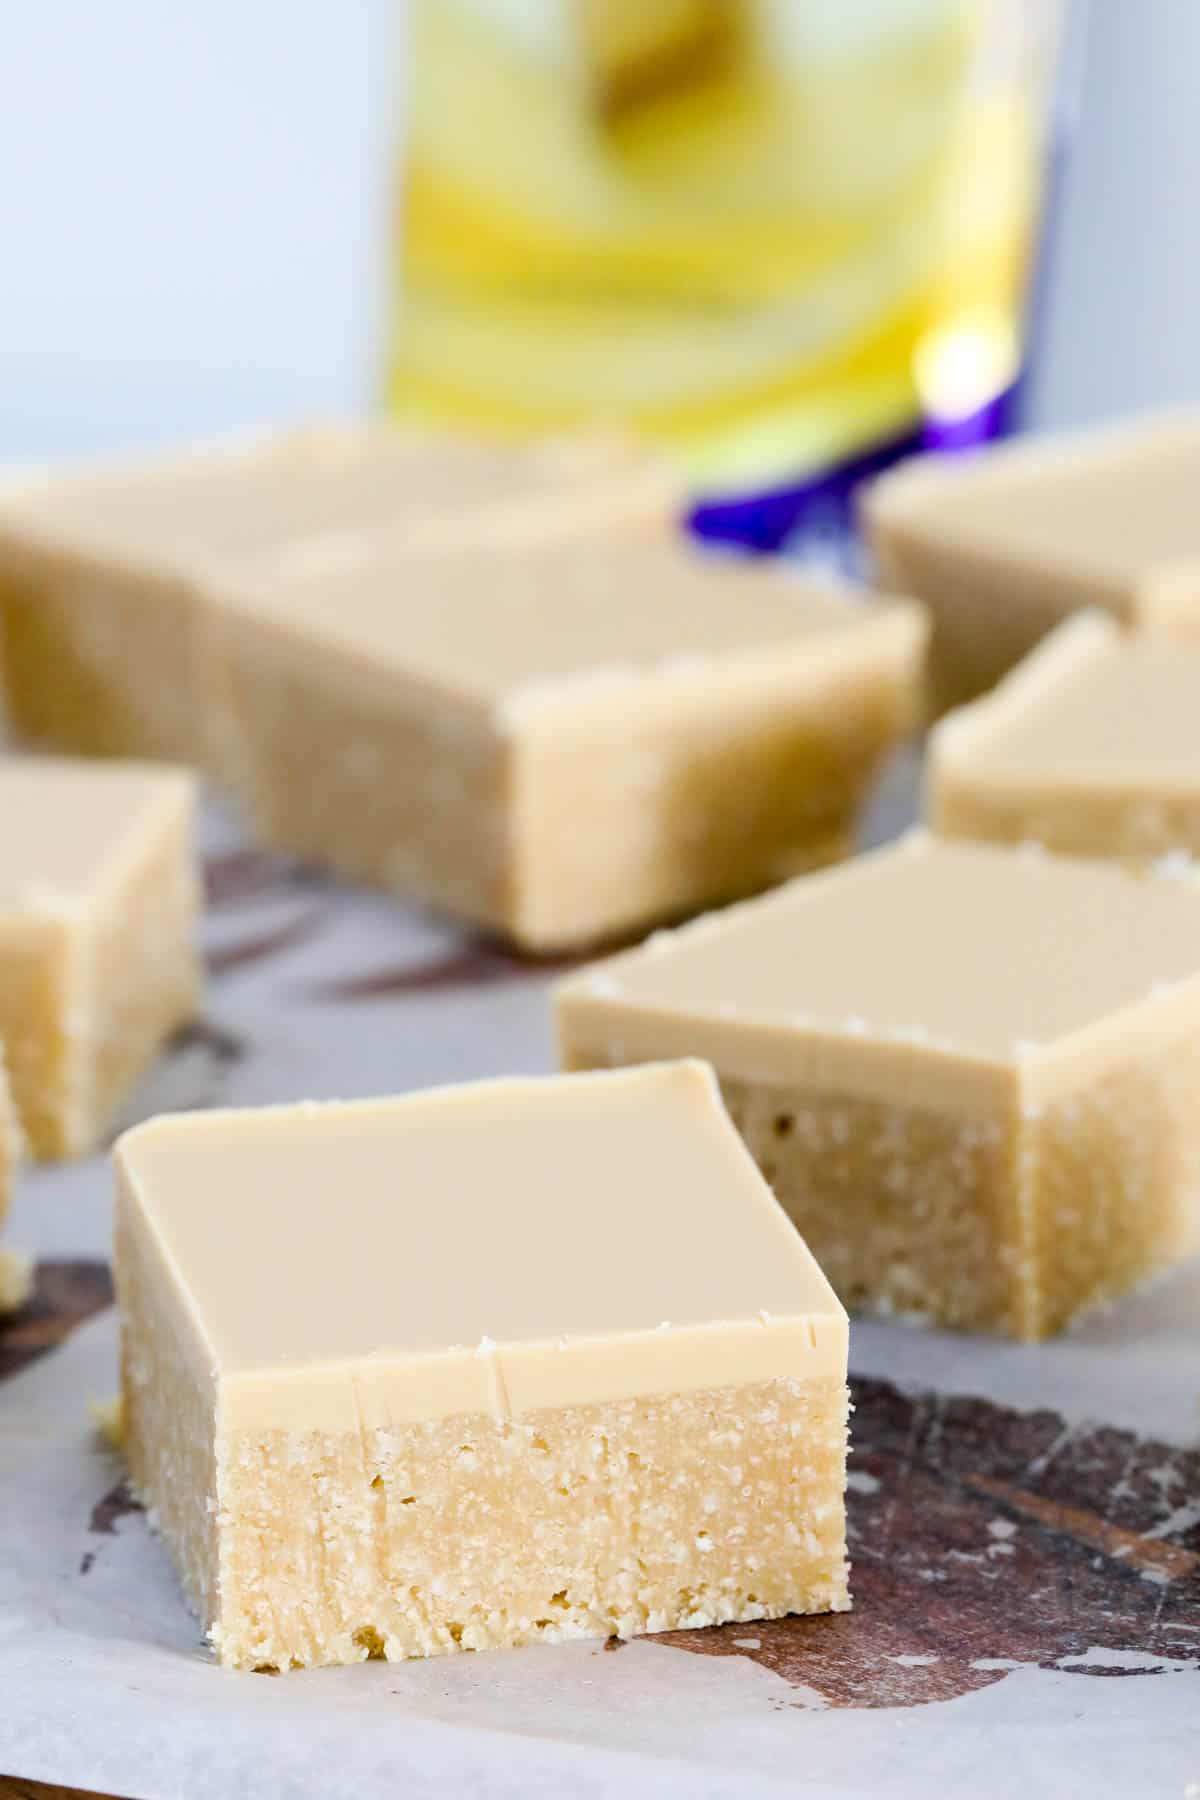 Small squares of caramilk slice on a board